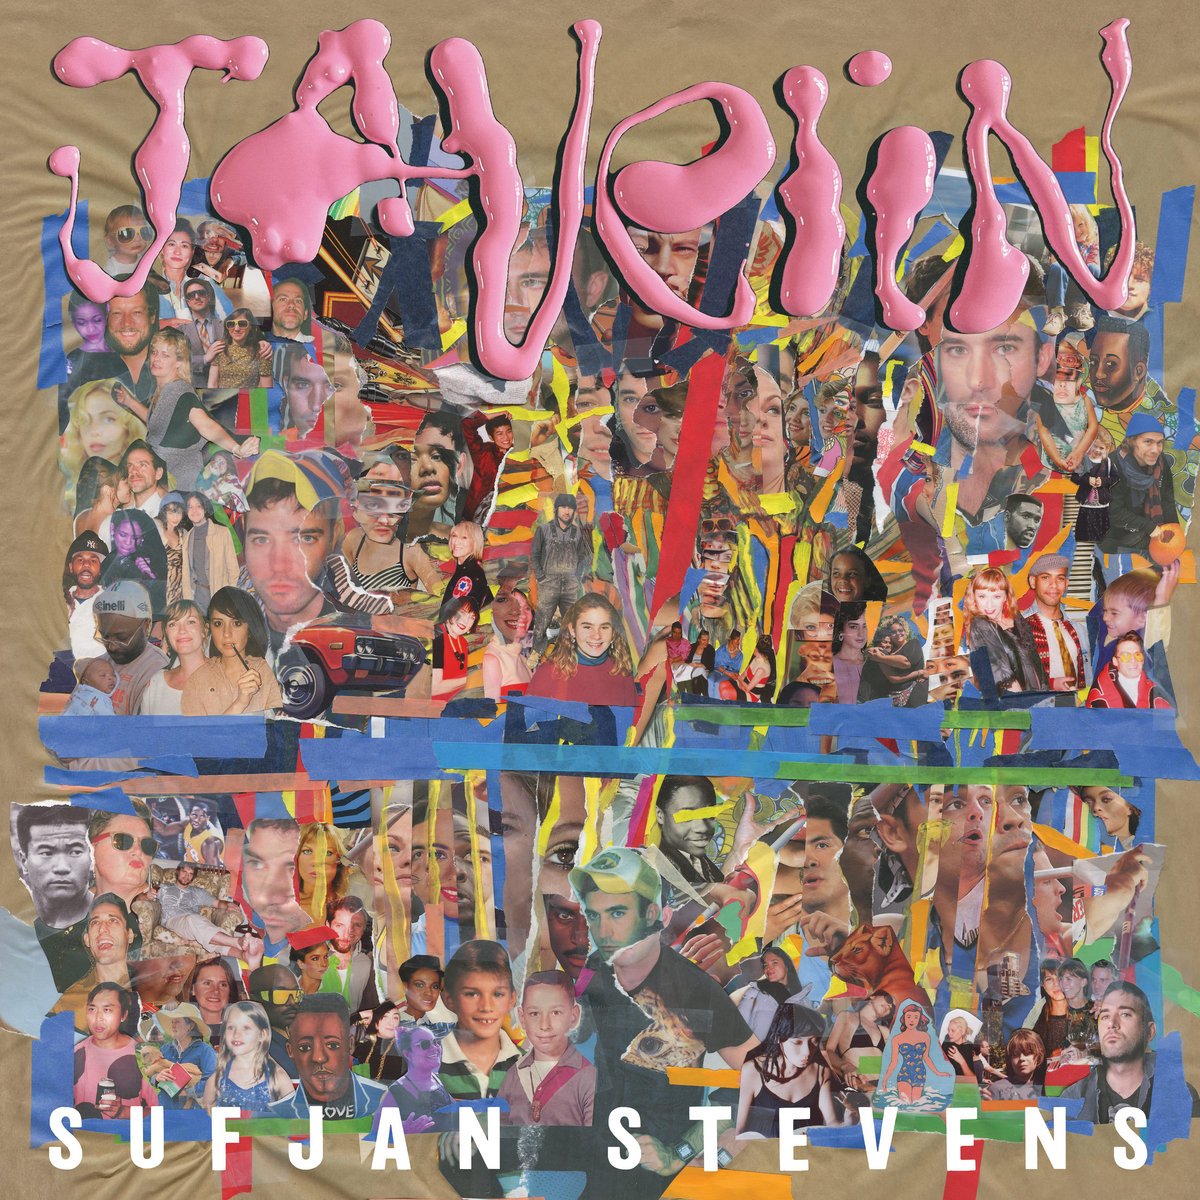 Cover of Sufjan Stevens' 2023 album, "Javelin." Dripped pink paint lettering on beige background with collaged images.